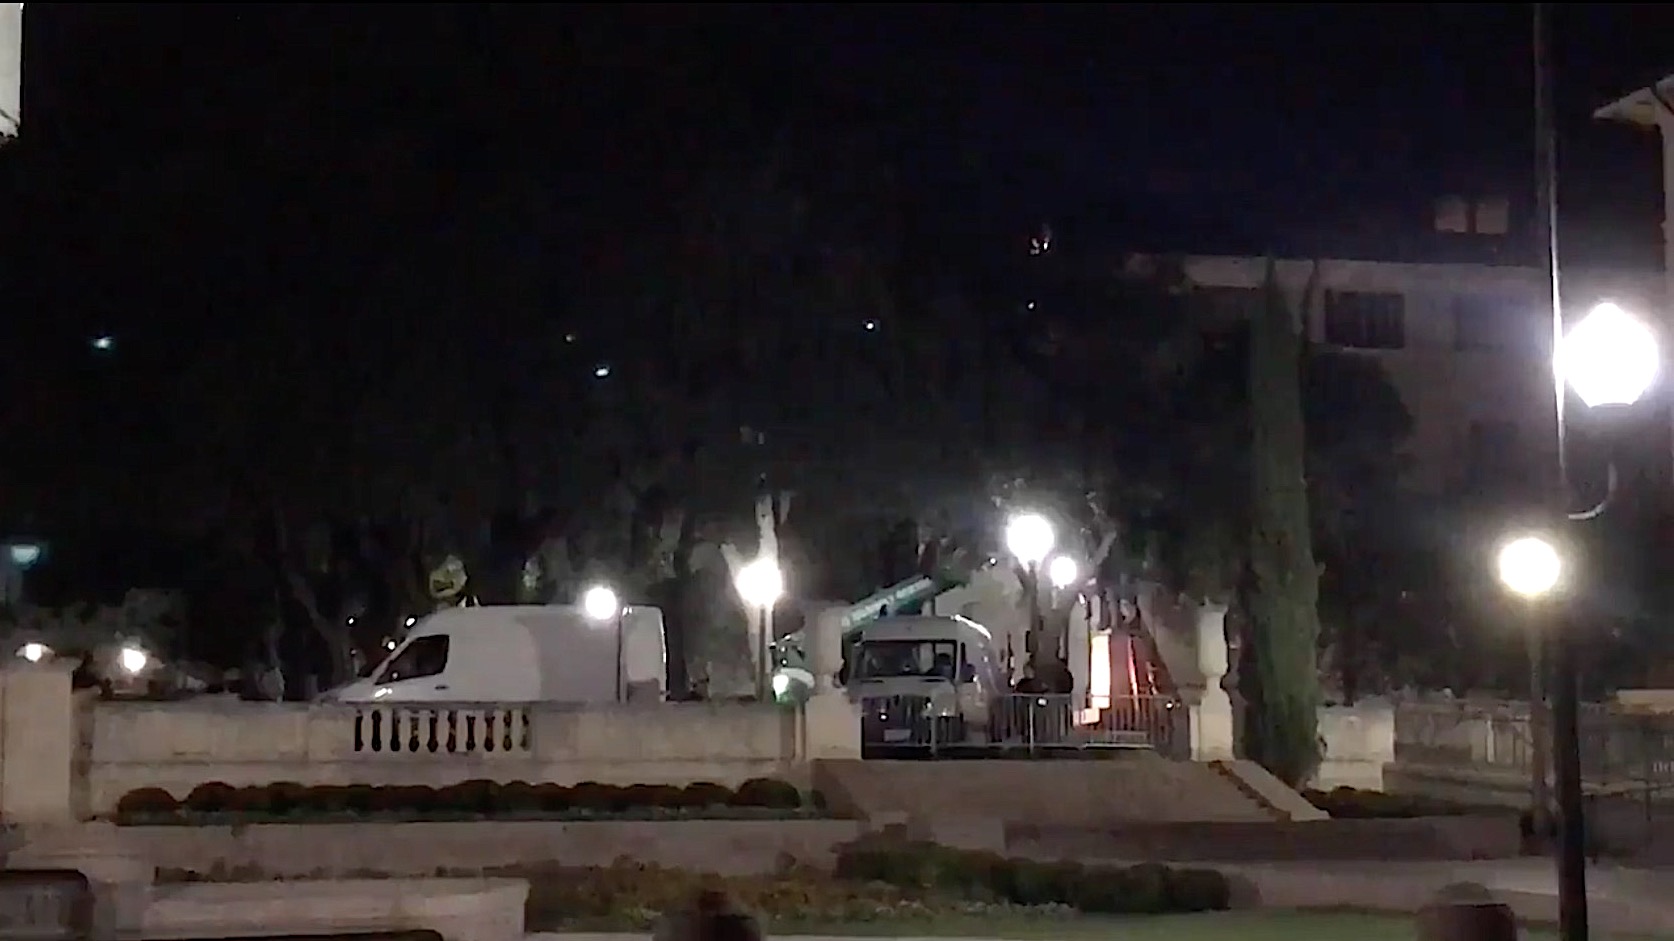 Confederate statues removed at UT Austin